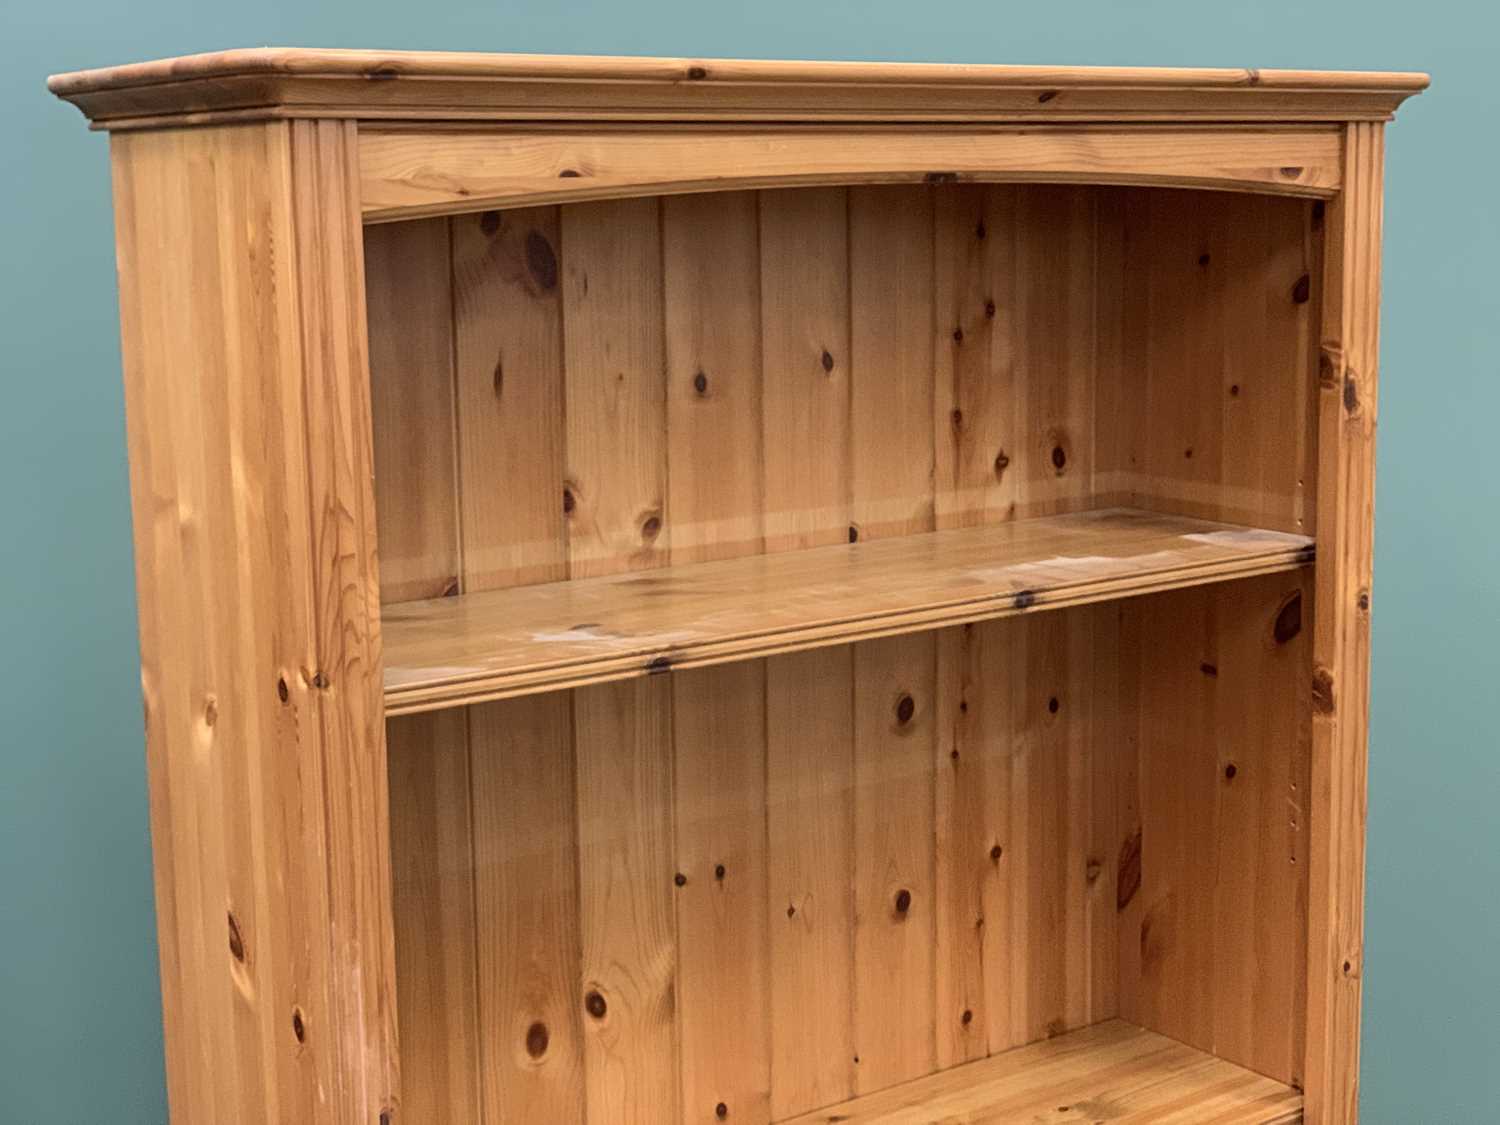 PINE BOOKCASE - modern with five open shelves, 188cms H, 100cms W, 33cms D - Image 2 of 4